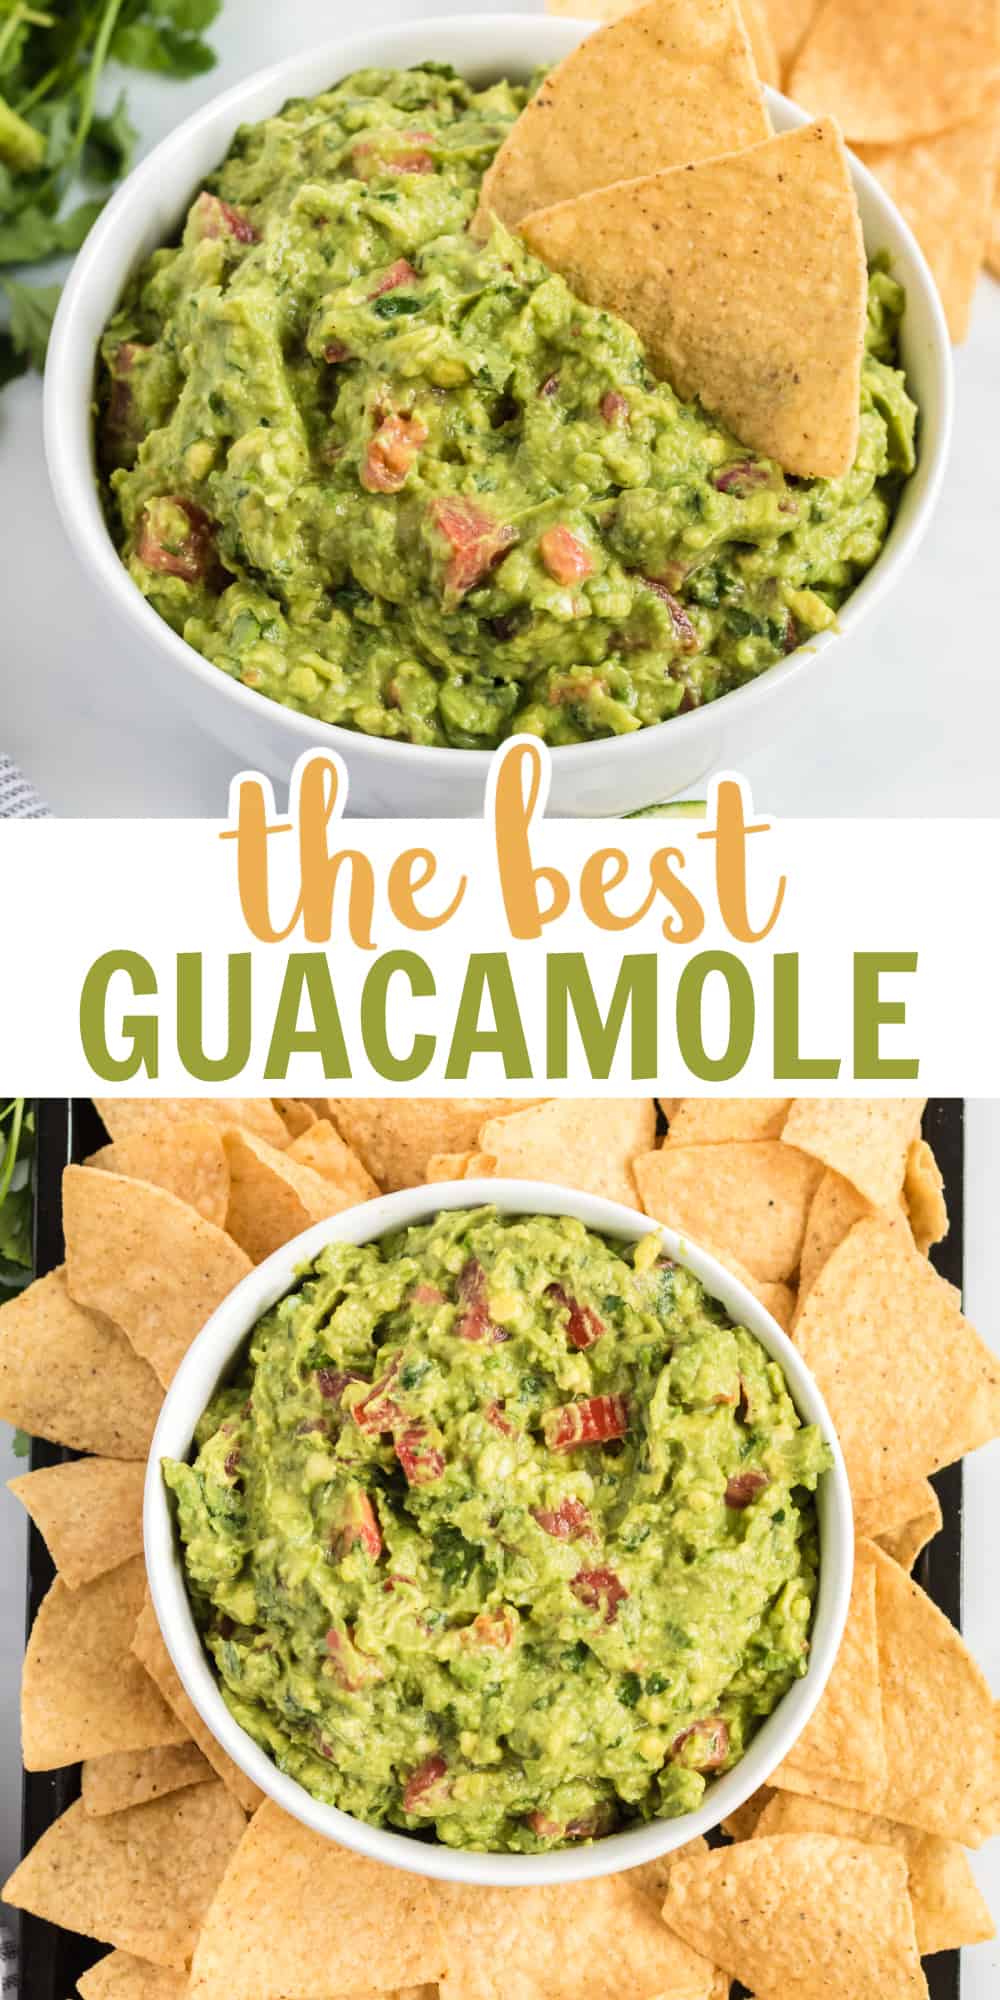 image with text "the best guacamole"